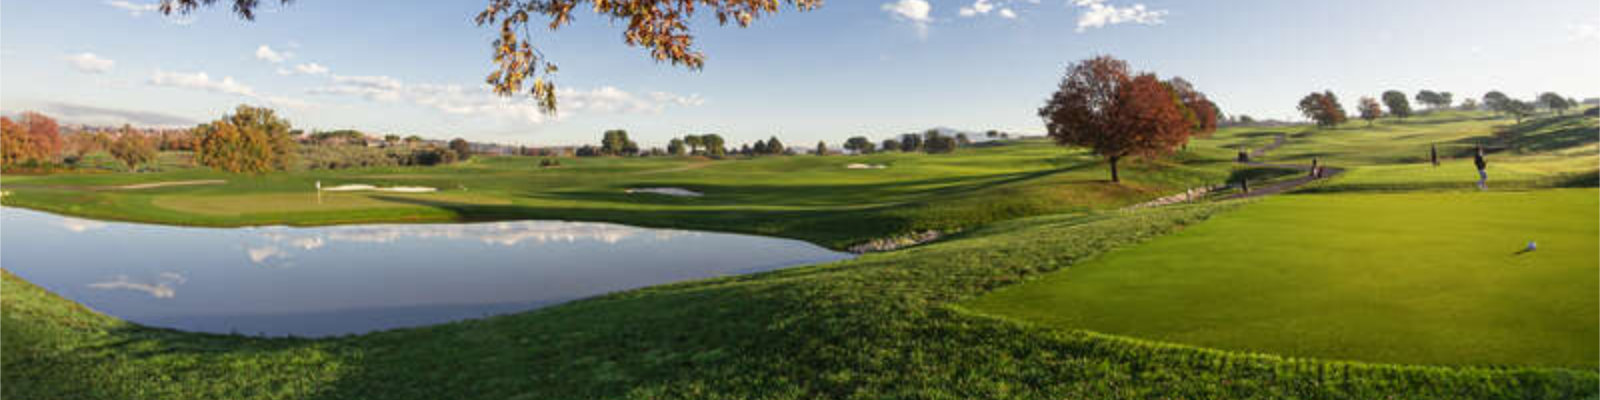 Bahn 18 des Marco Simone Ryder Cup Course (photo by golfextra)